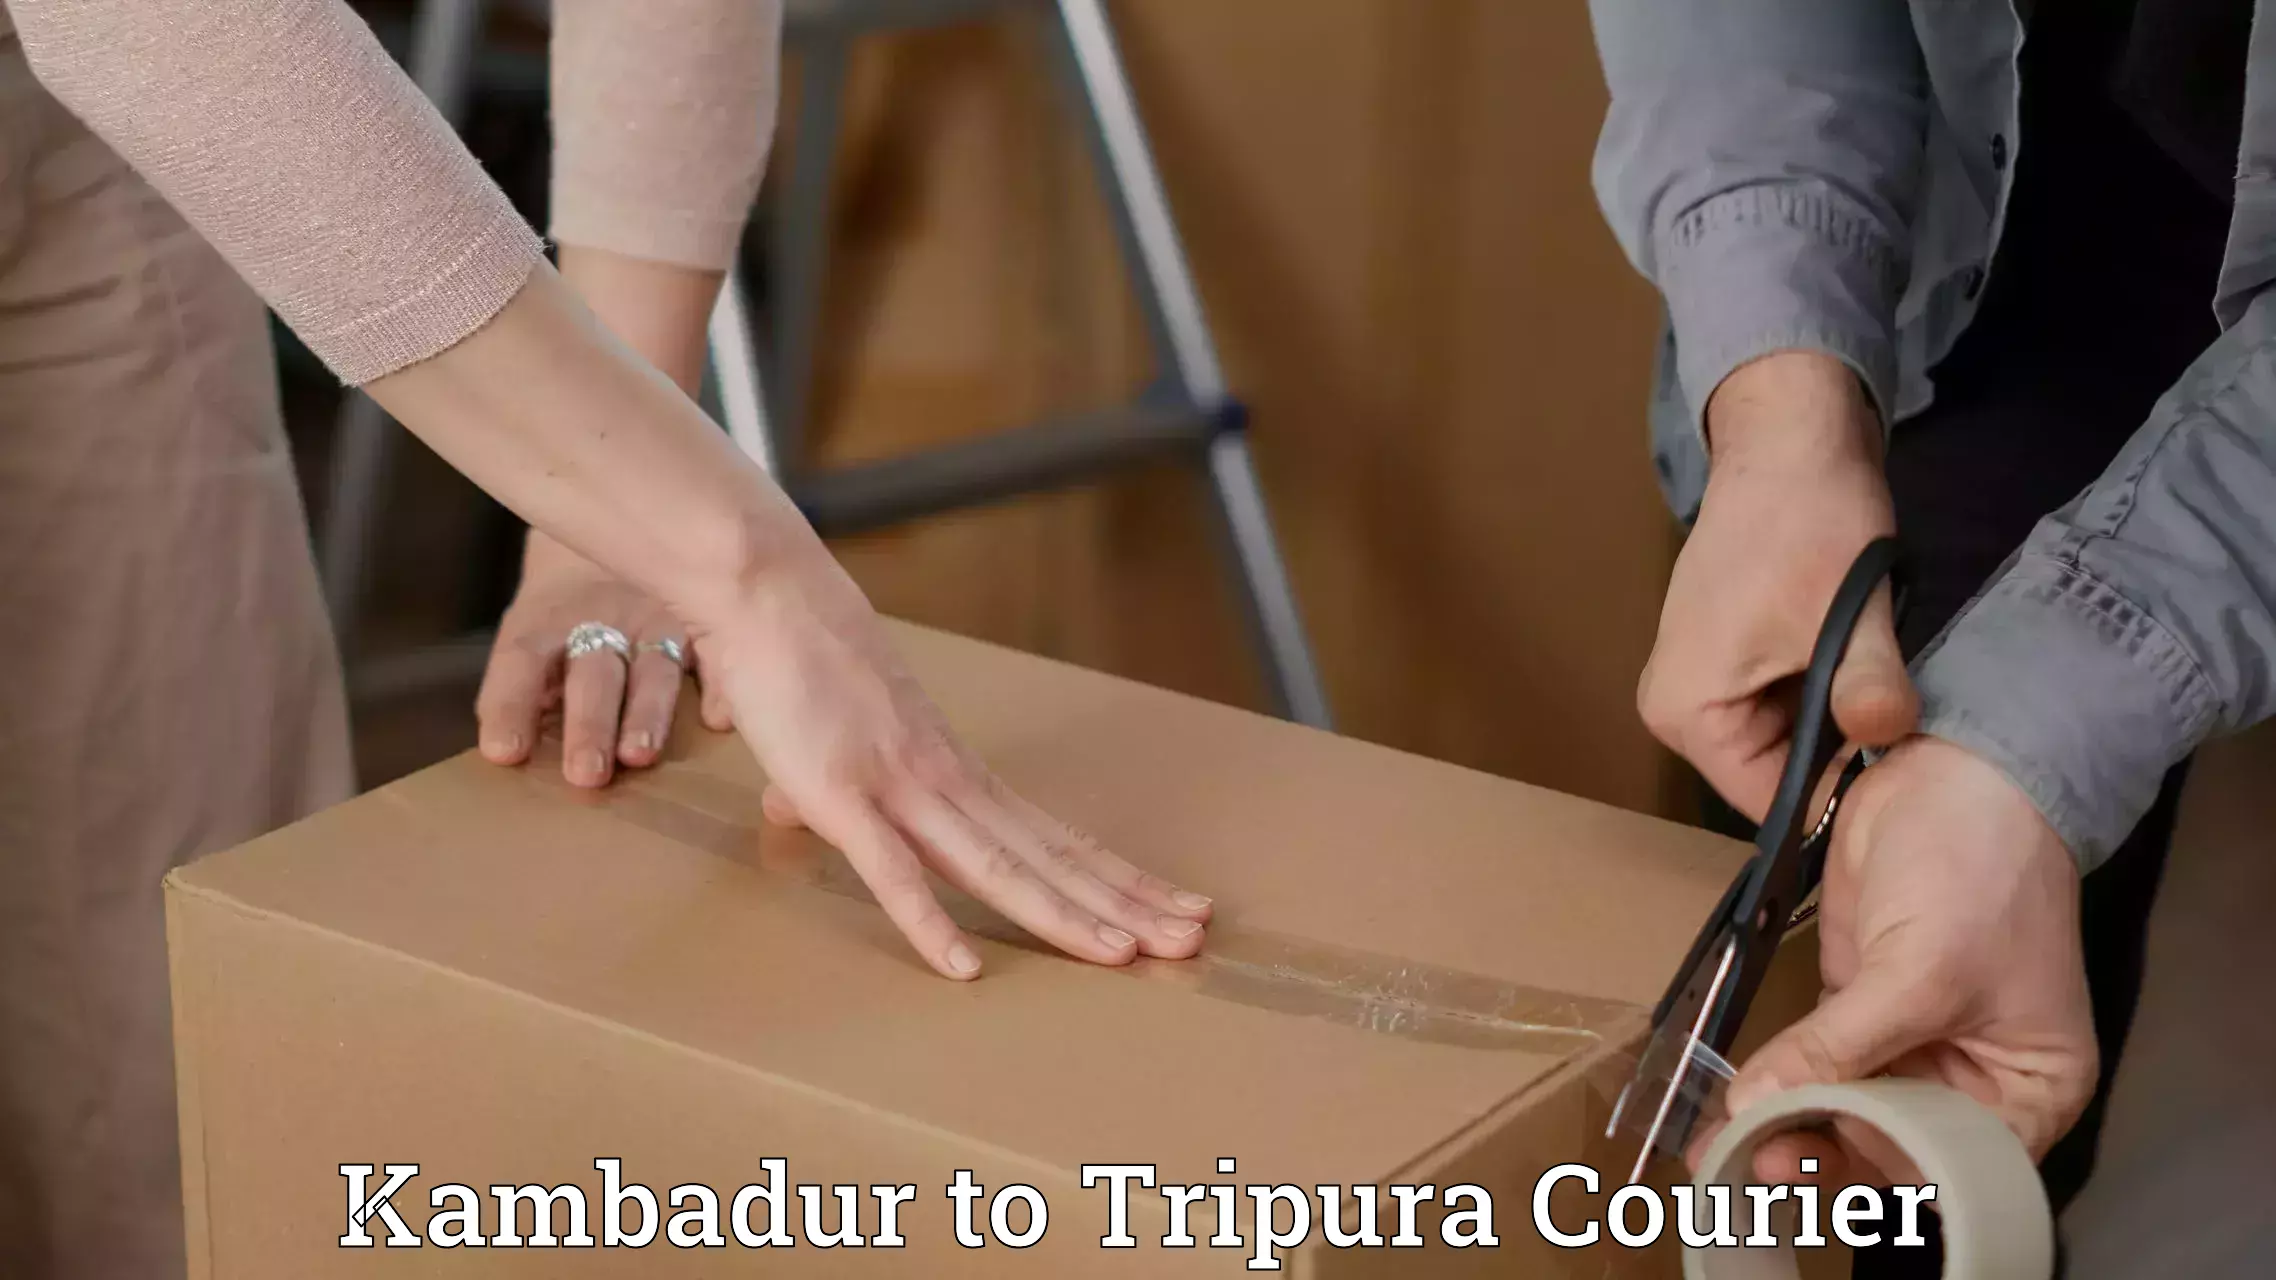 High-quality delivery services Kambadur to Udaipur Tripura